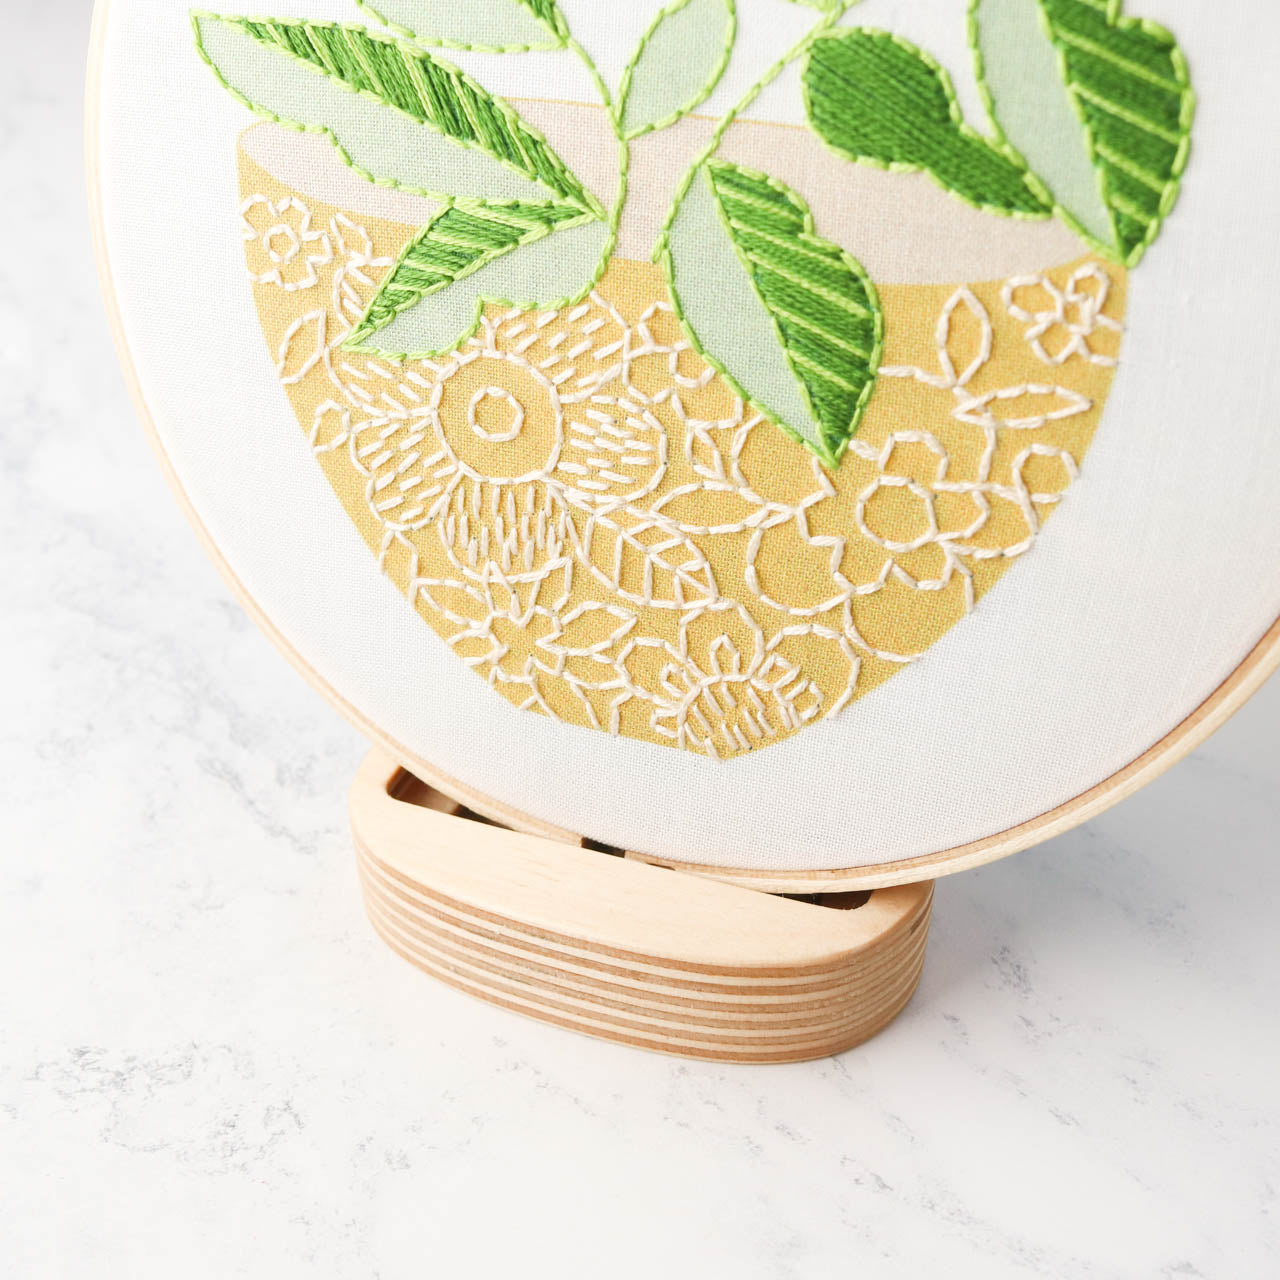 Adjustable Embroidery Hoop Table and Seat Stand - Stitched Modern